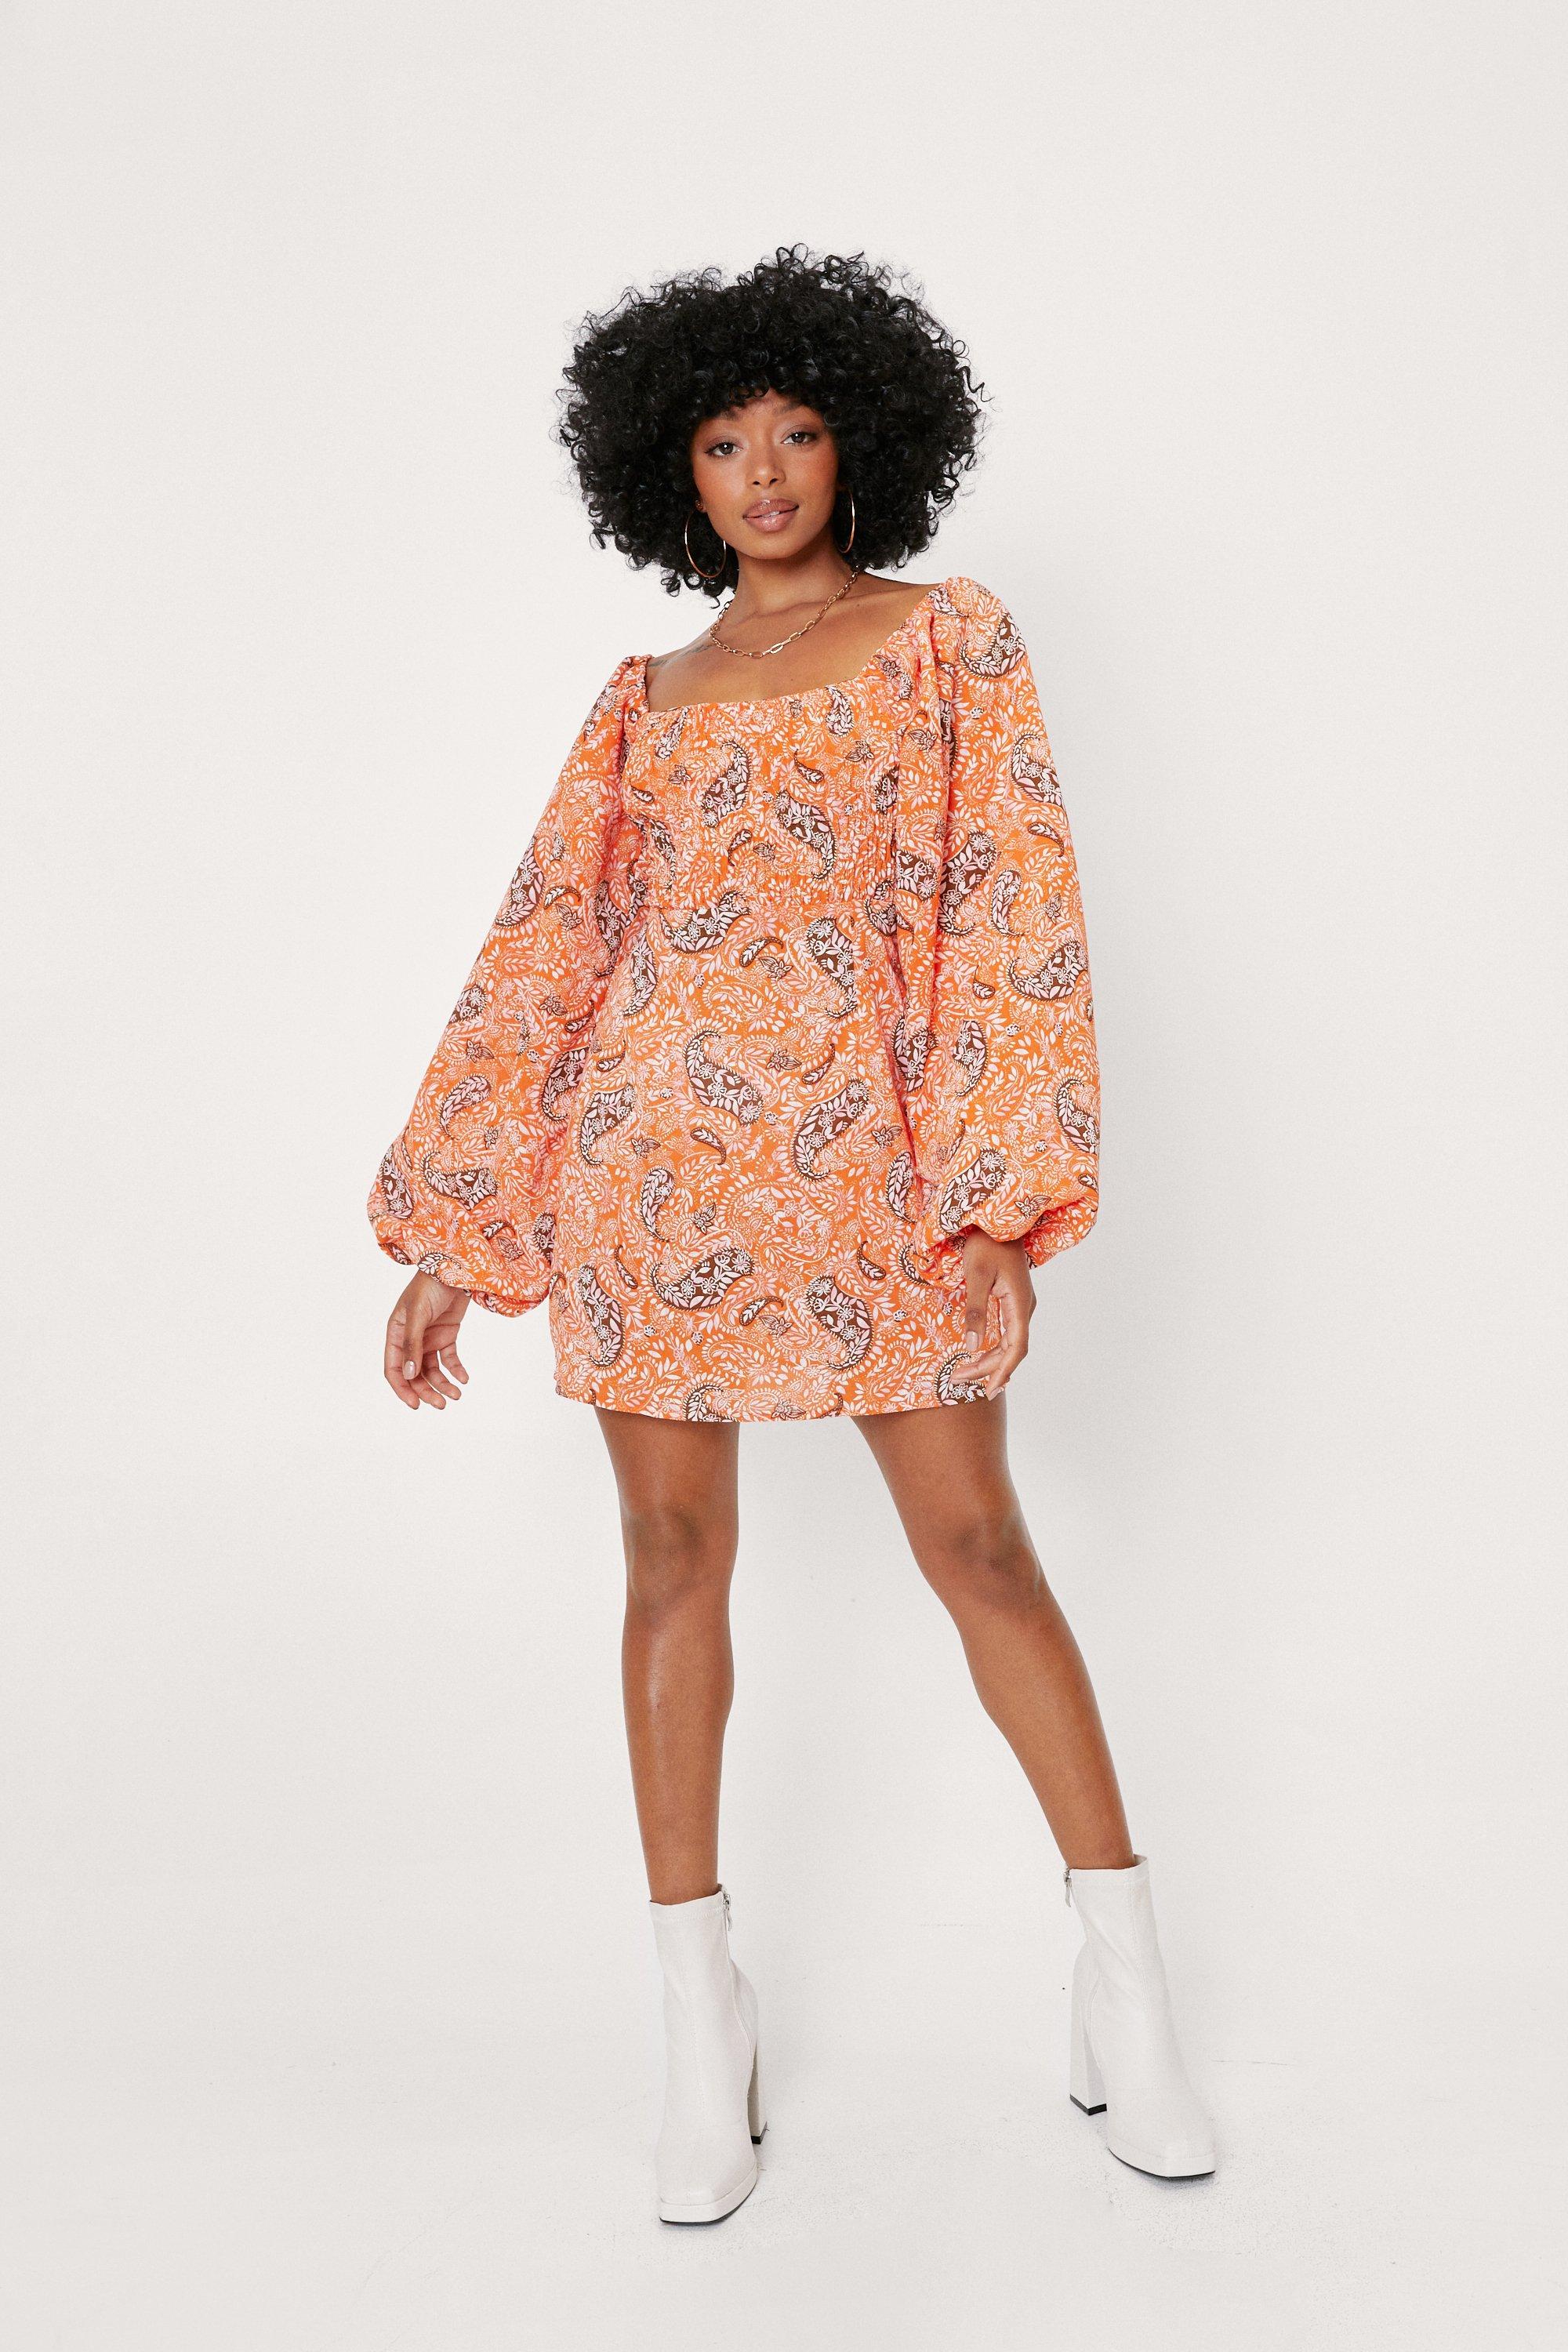 70s Outfits – 70s Style Ideas for Women Womens Petite Paisley Puff Sleeve Mini Dress - Orange - 10 $24.00 AT vintagedancer.com